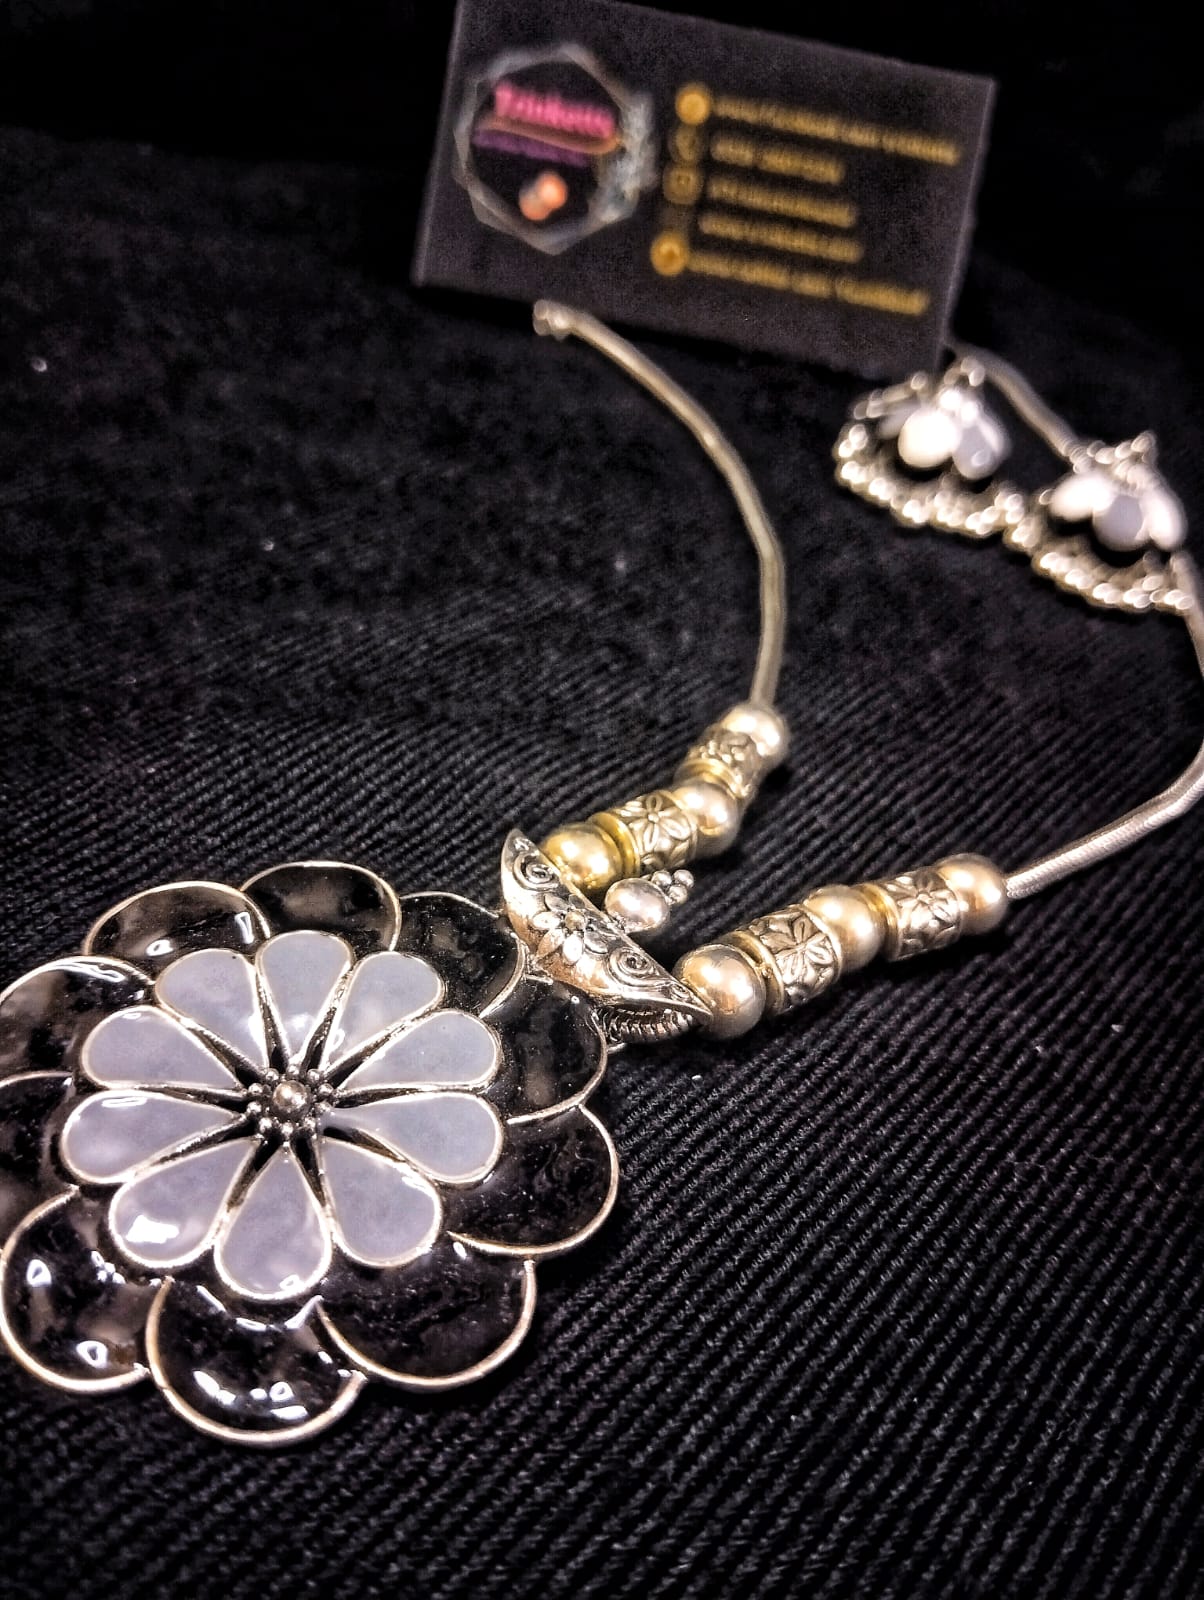 A black Floral Meenakaari Jewelry Set in black and grey Meena Kaari design, accompanied by matching Meena Karai jhumkis (dangling earrings) in black and grey, featuring attached ghungroos (small bells). The pendant hangs on an oxidized silver chain with an S hook closure."